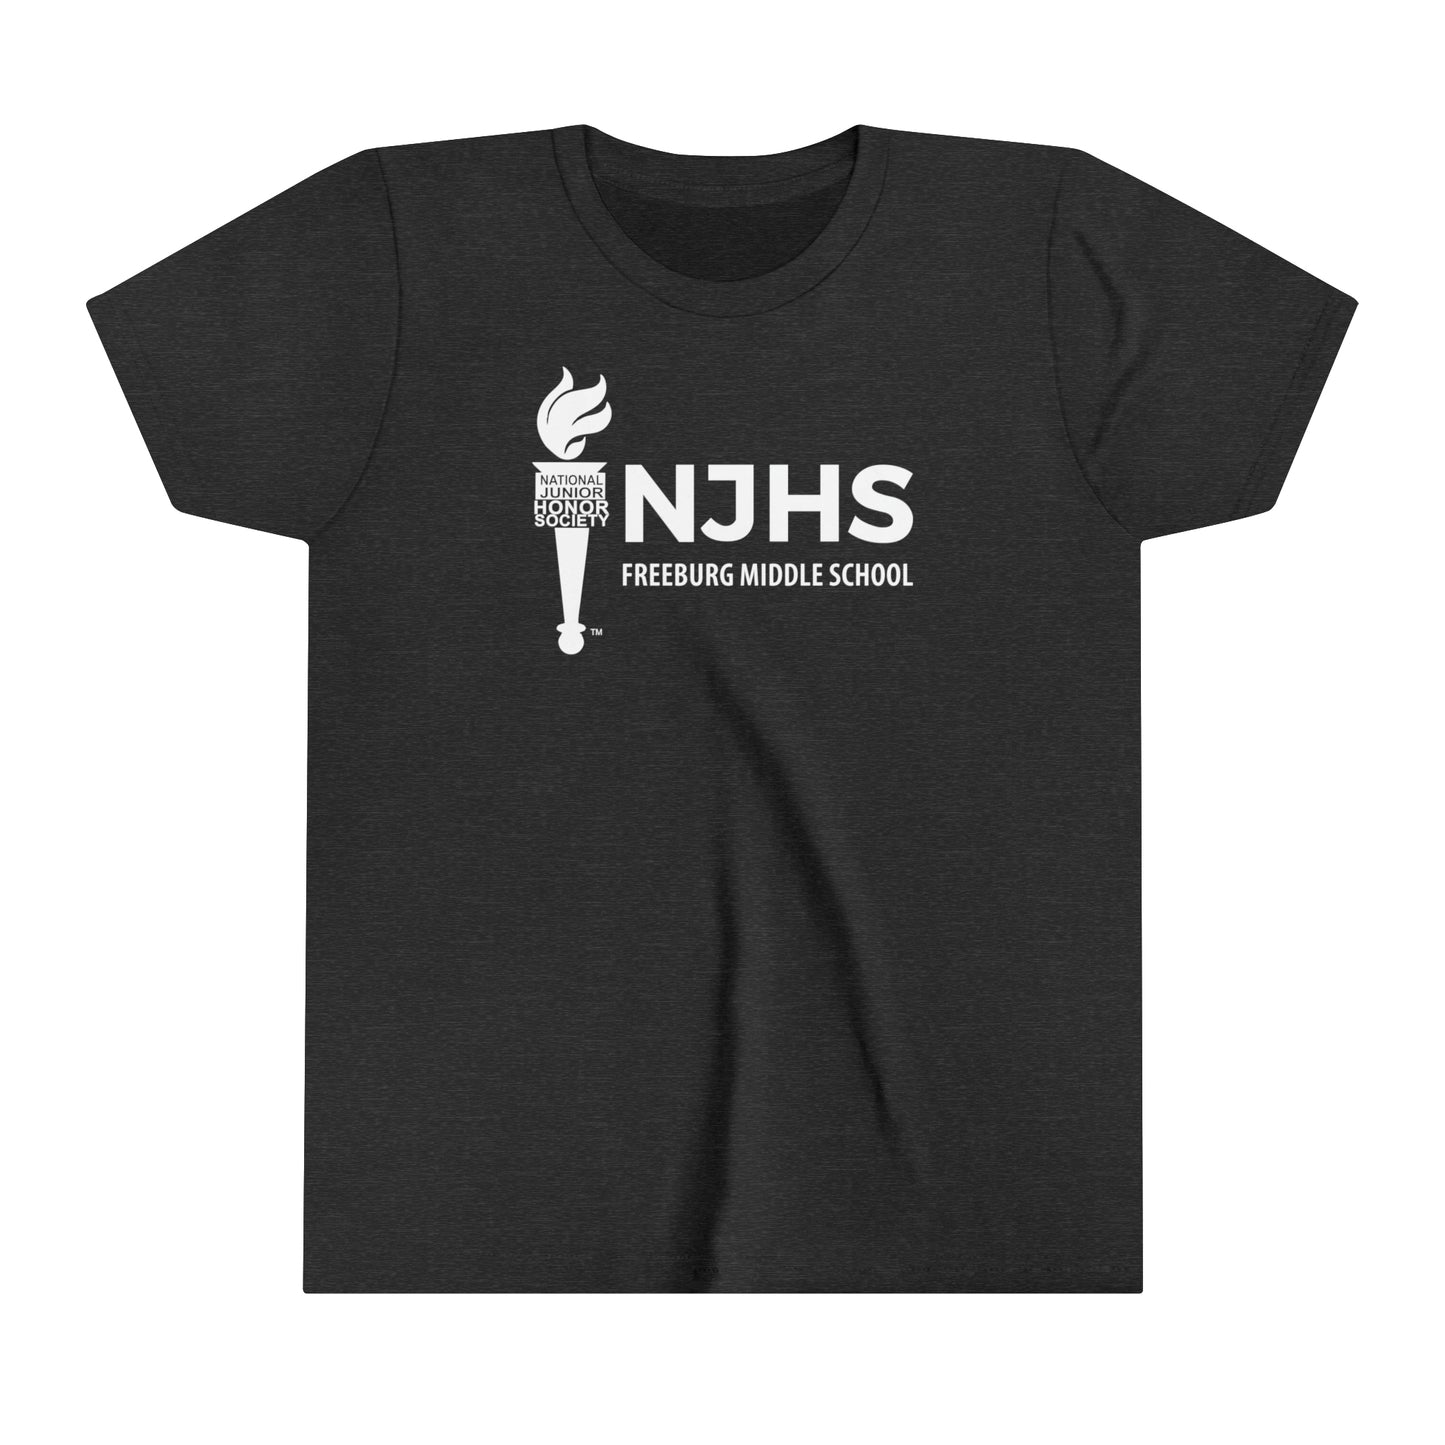 YOUTH - NJHS National Junior Honor Society White Print Youth Short Sleeve Tee